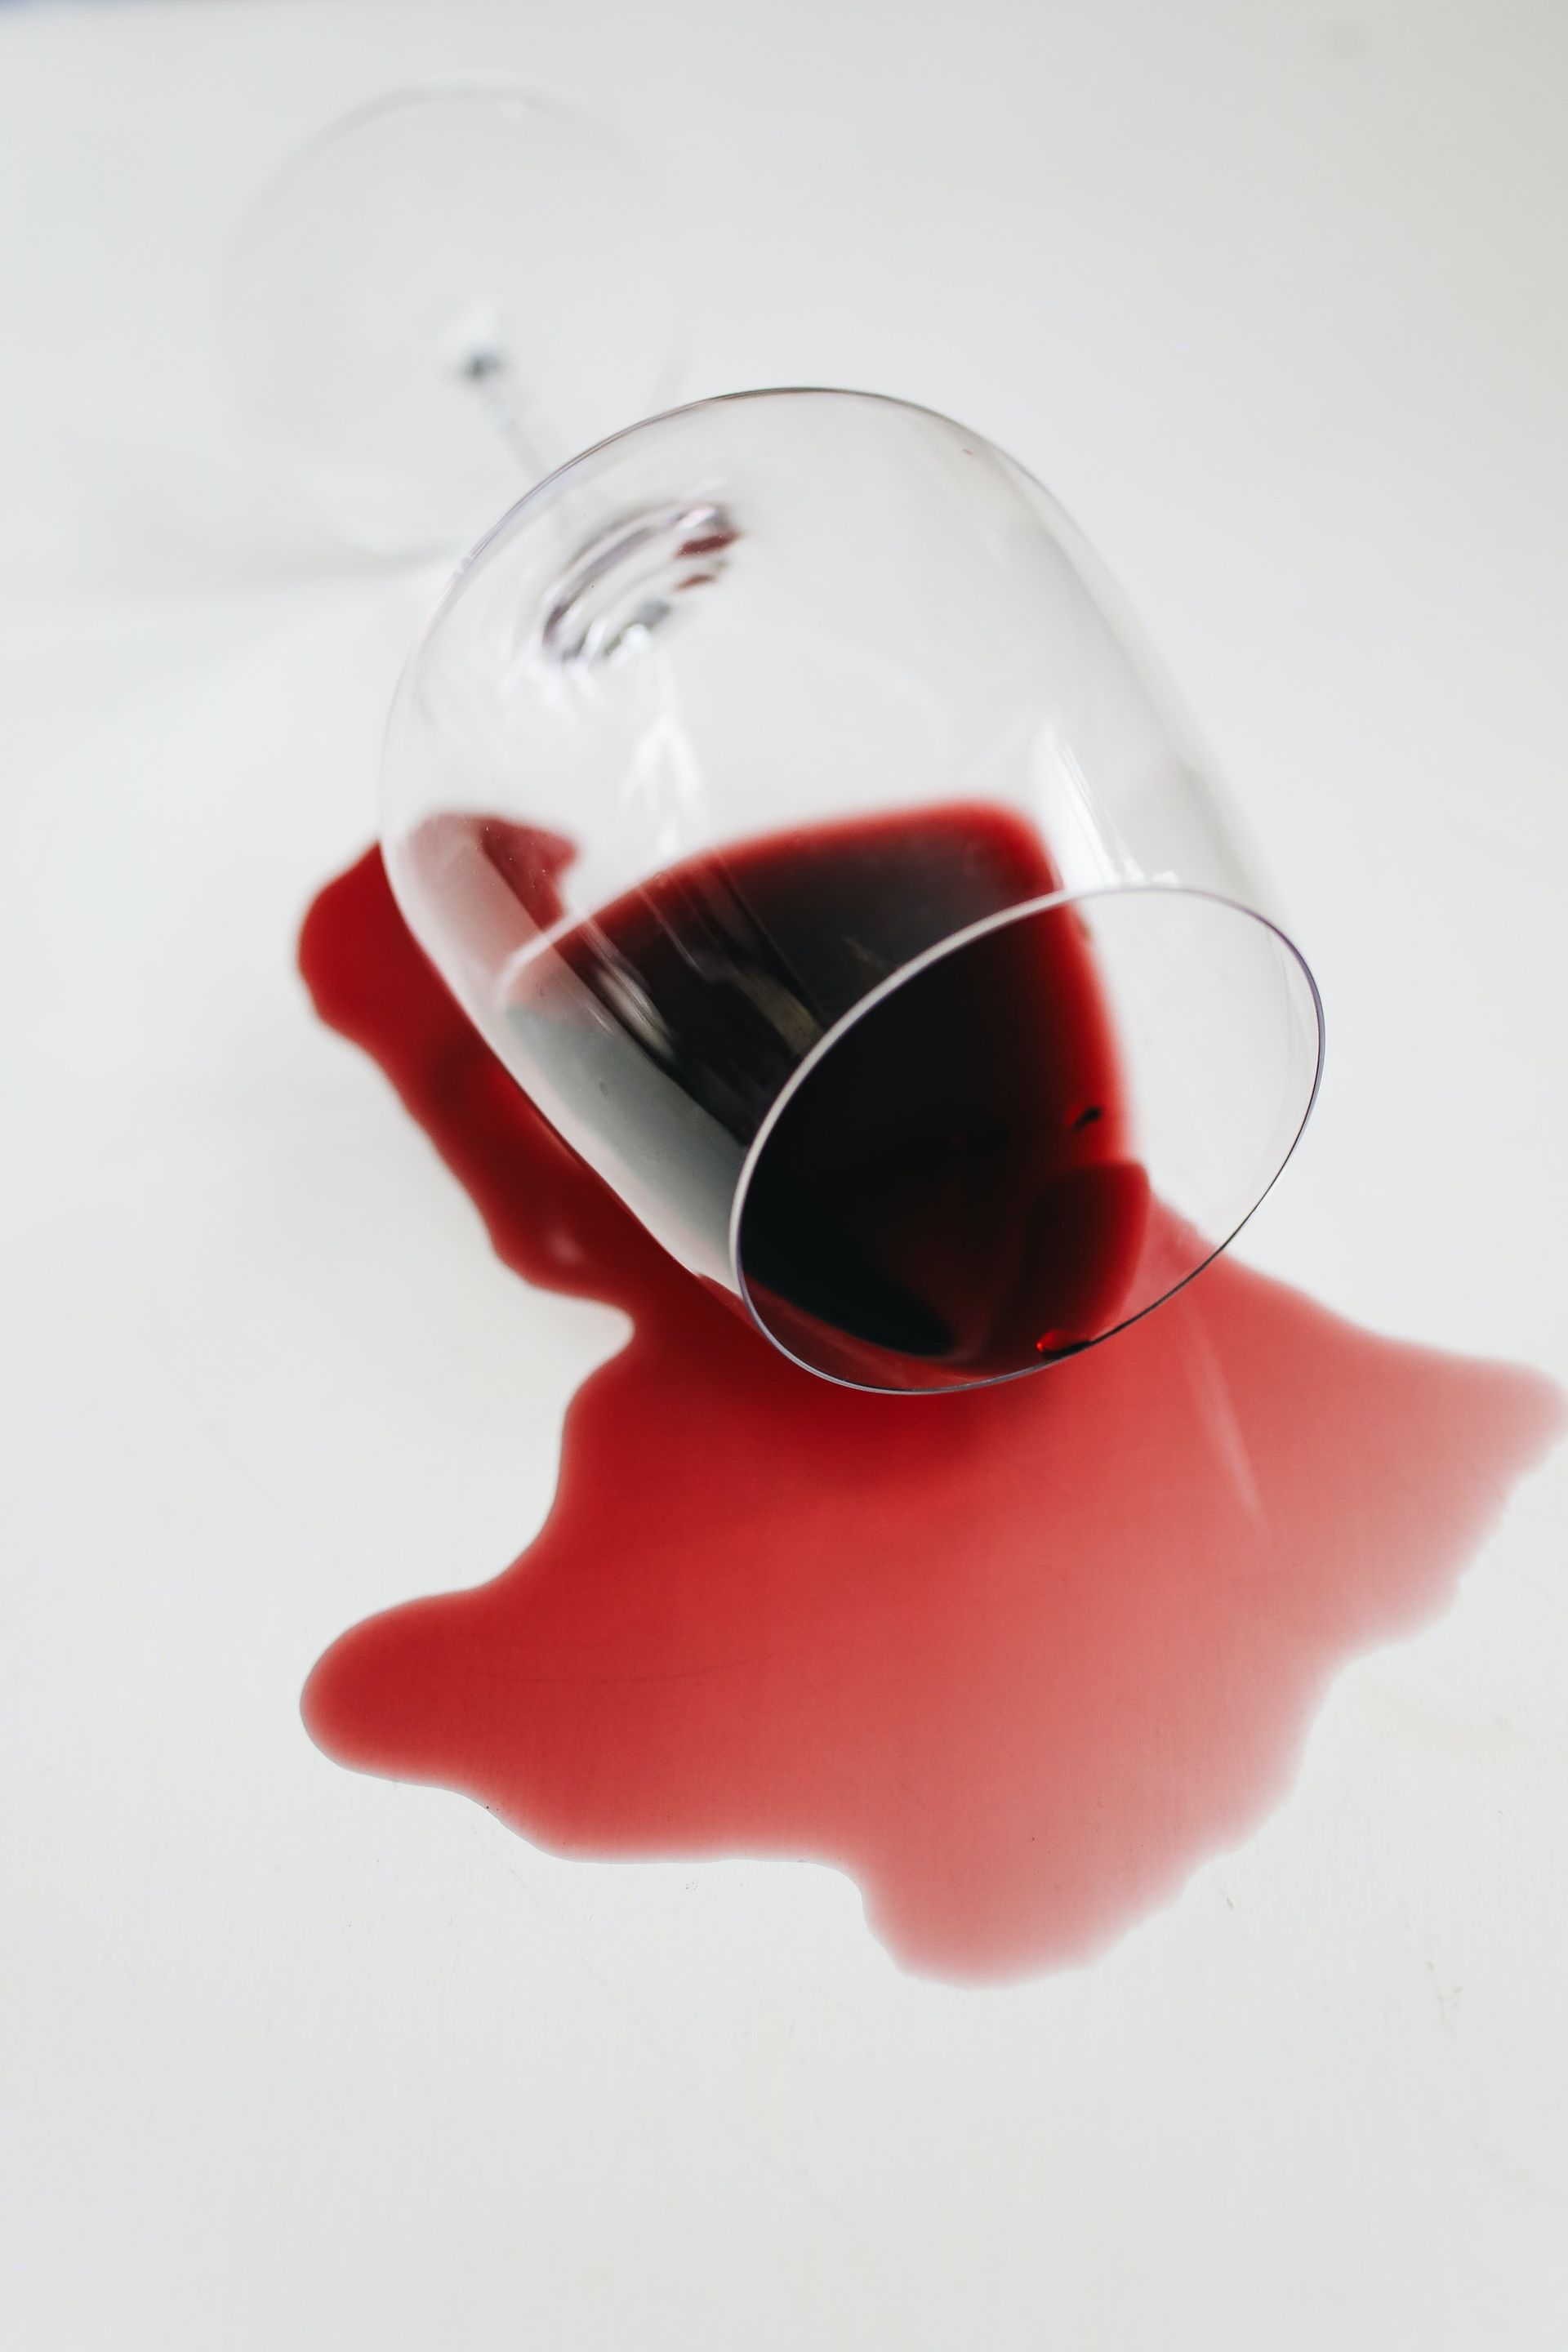 A glass of spilled wine.